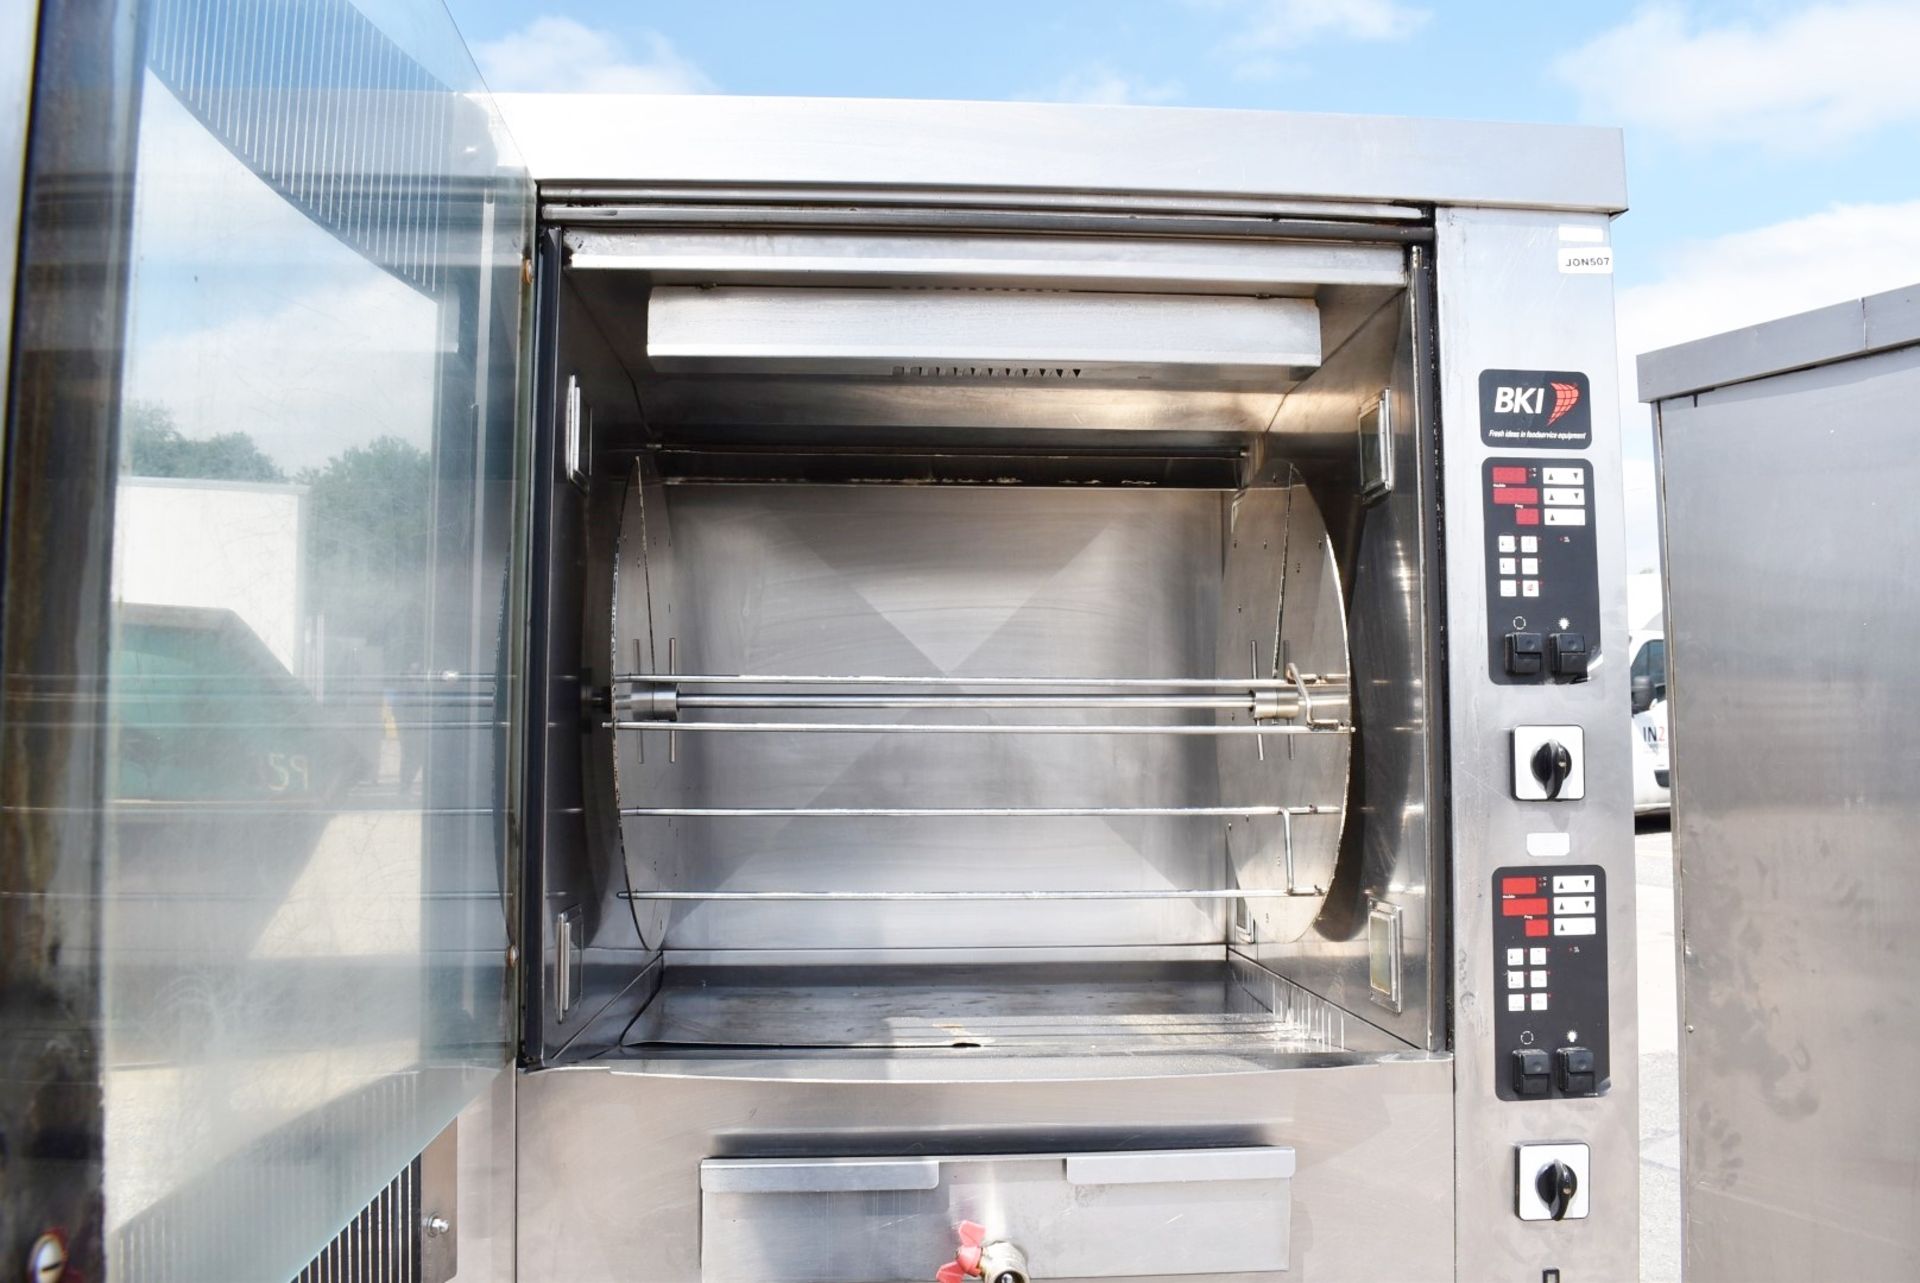 1 x BKI BBQ King Commercial Double Rotisserie Chicken Oven With Stand - Type VGUK16 - 3 Phase - Image 7 of 21